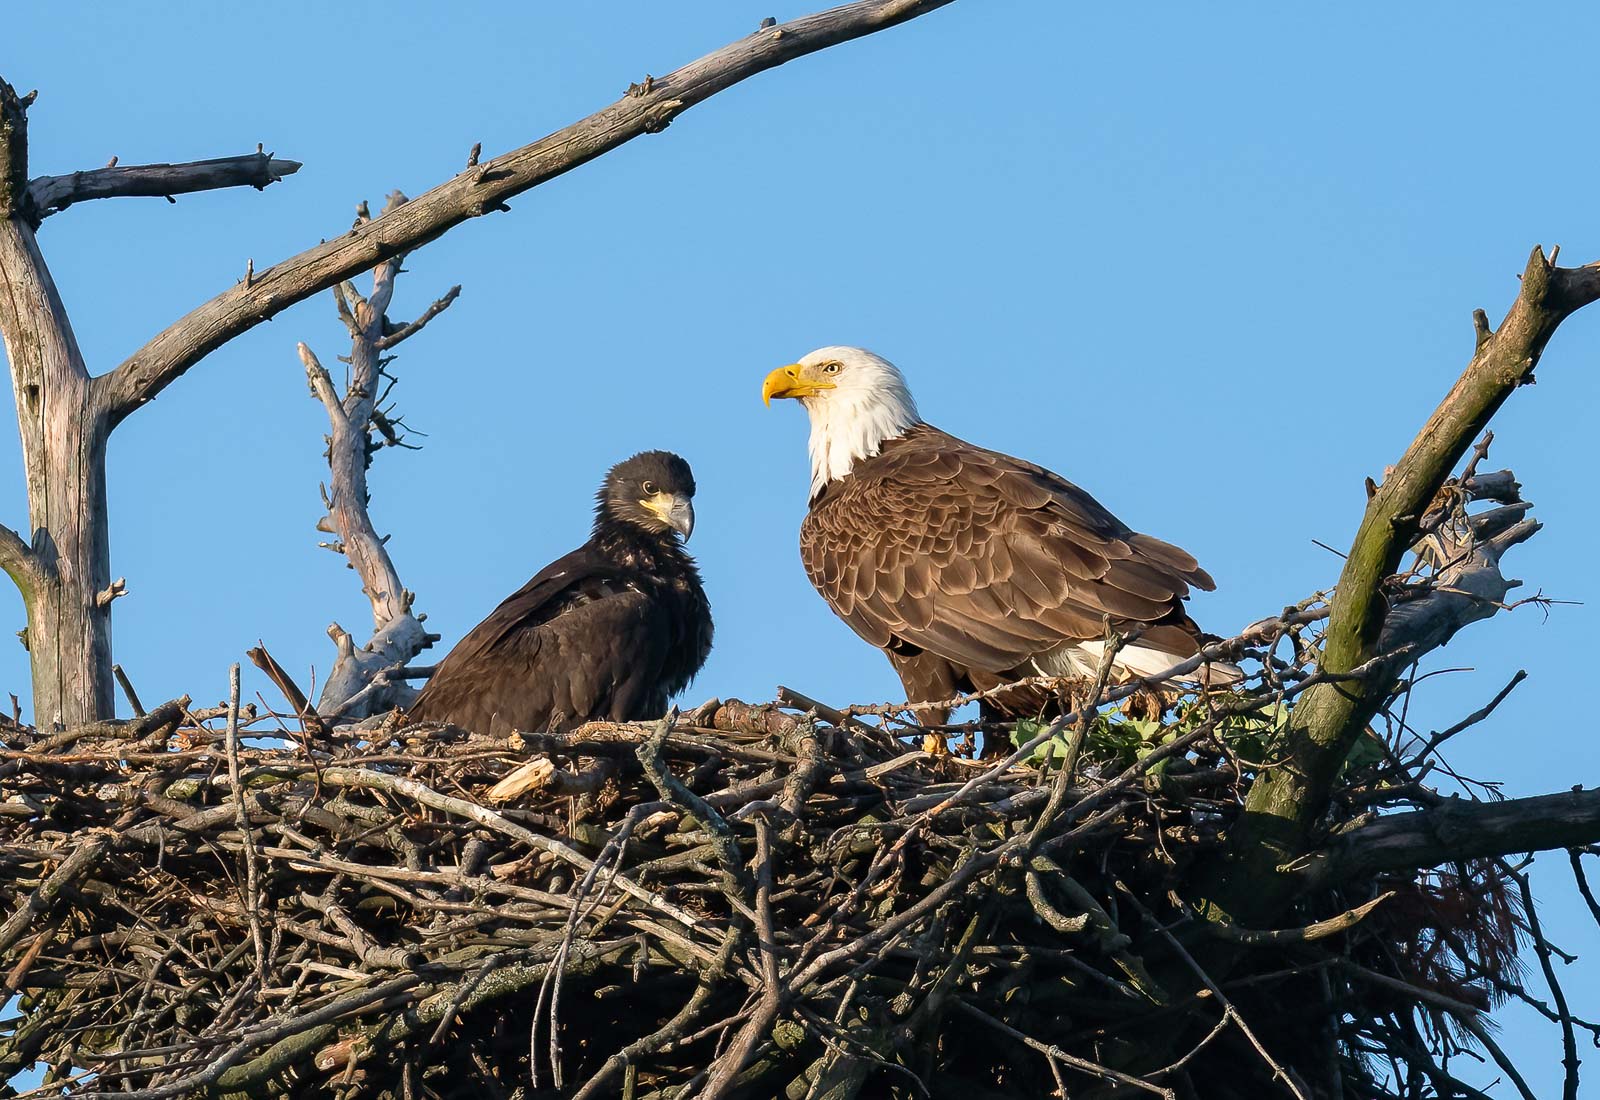 Mama Eagle and her eaglet